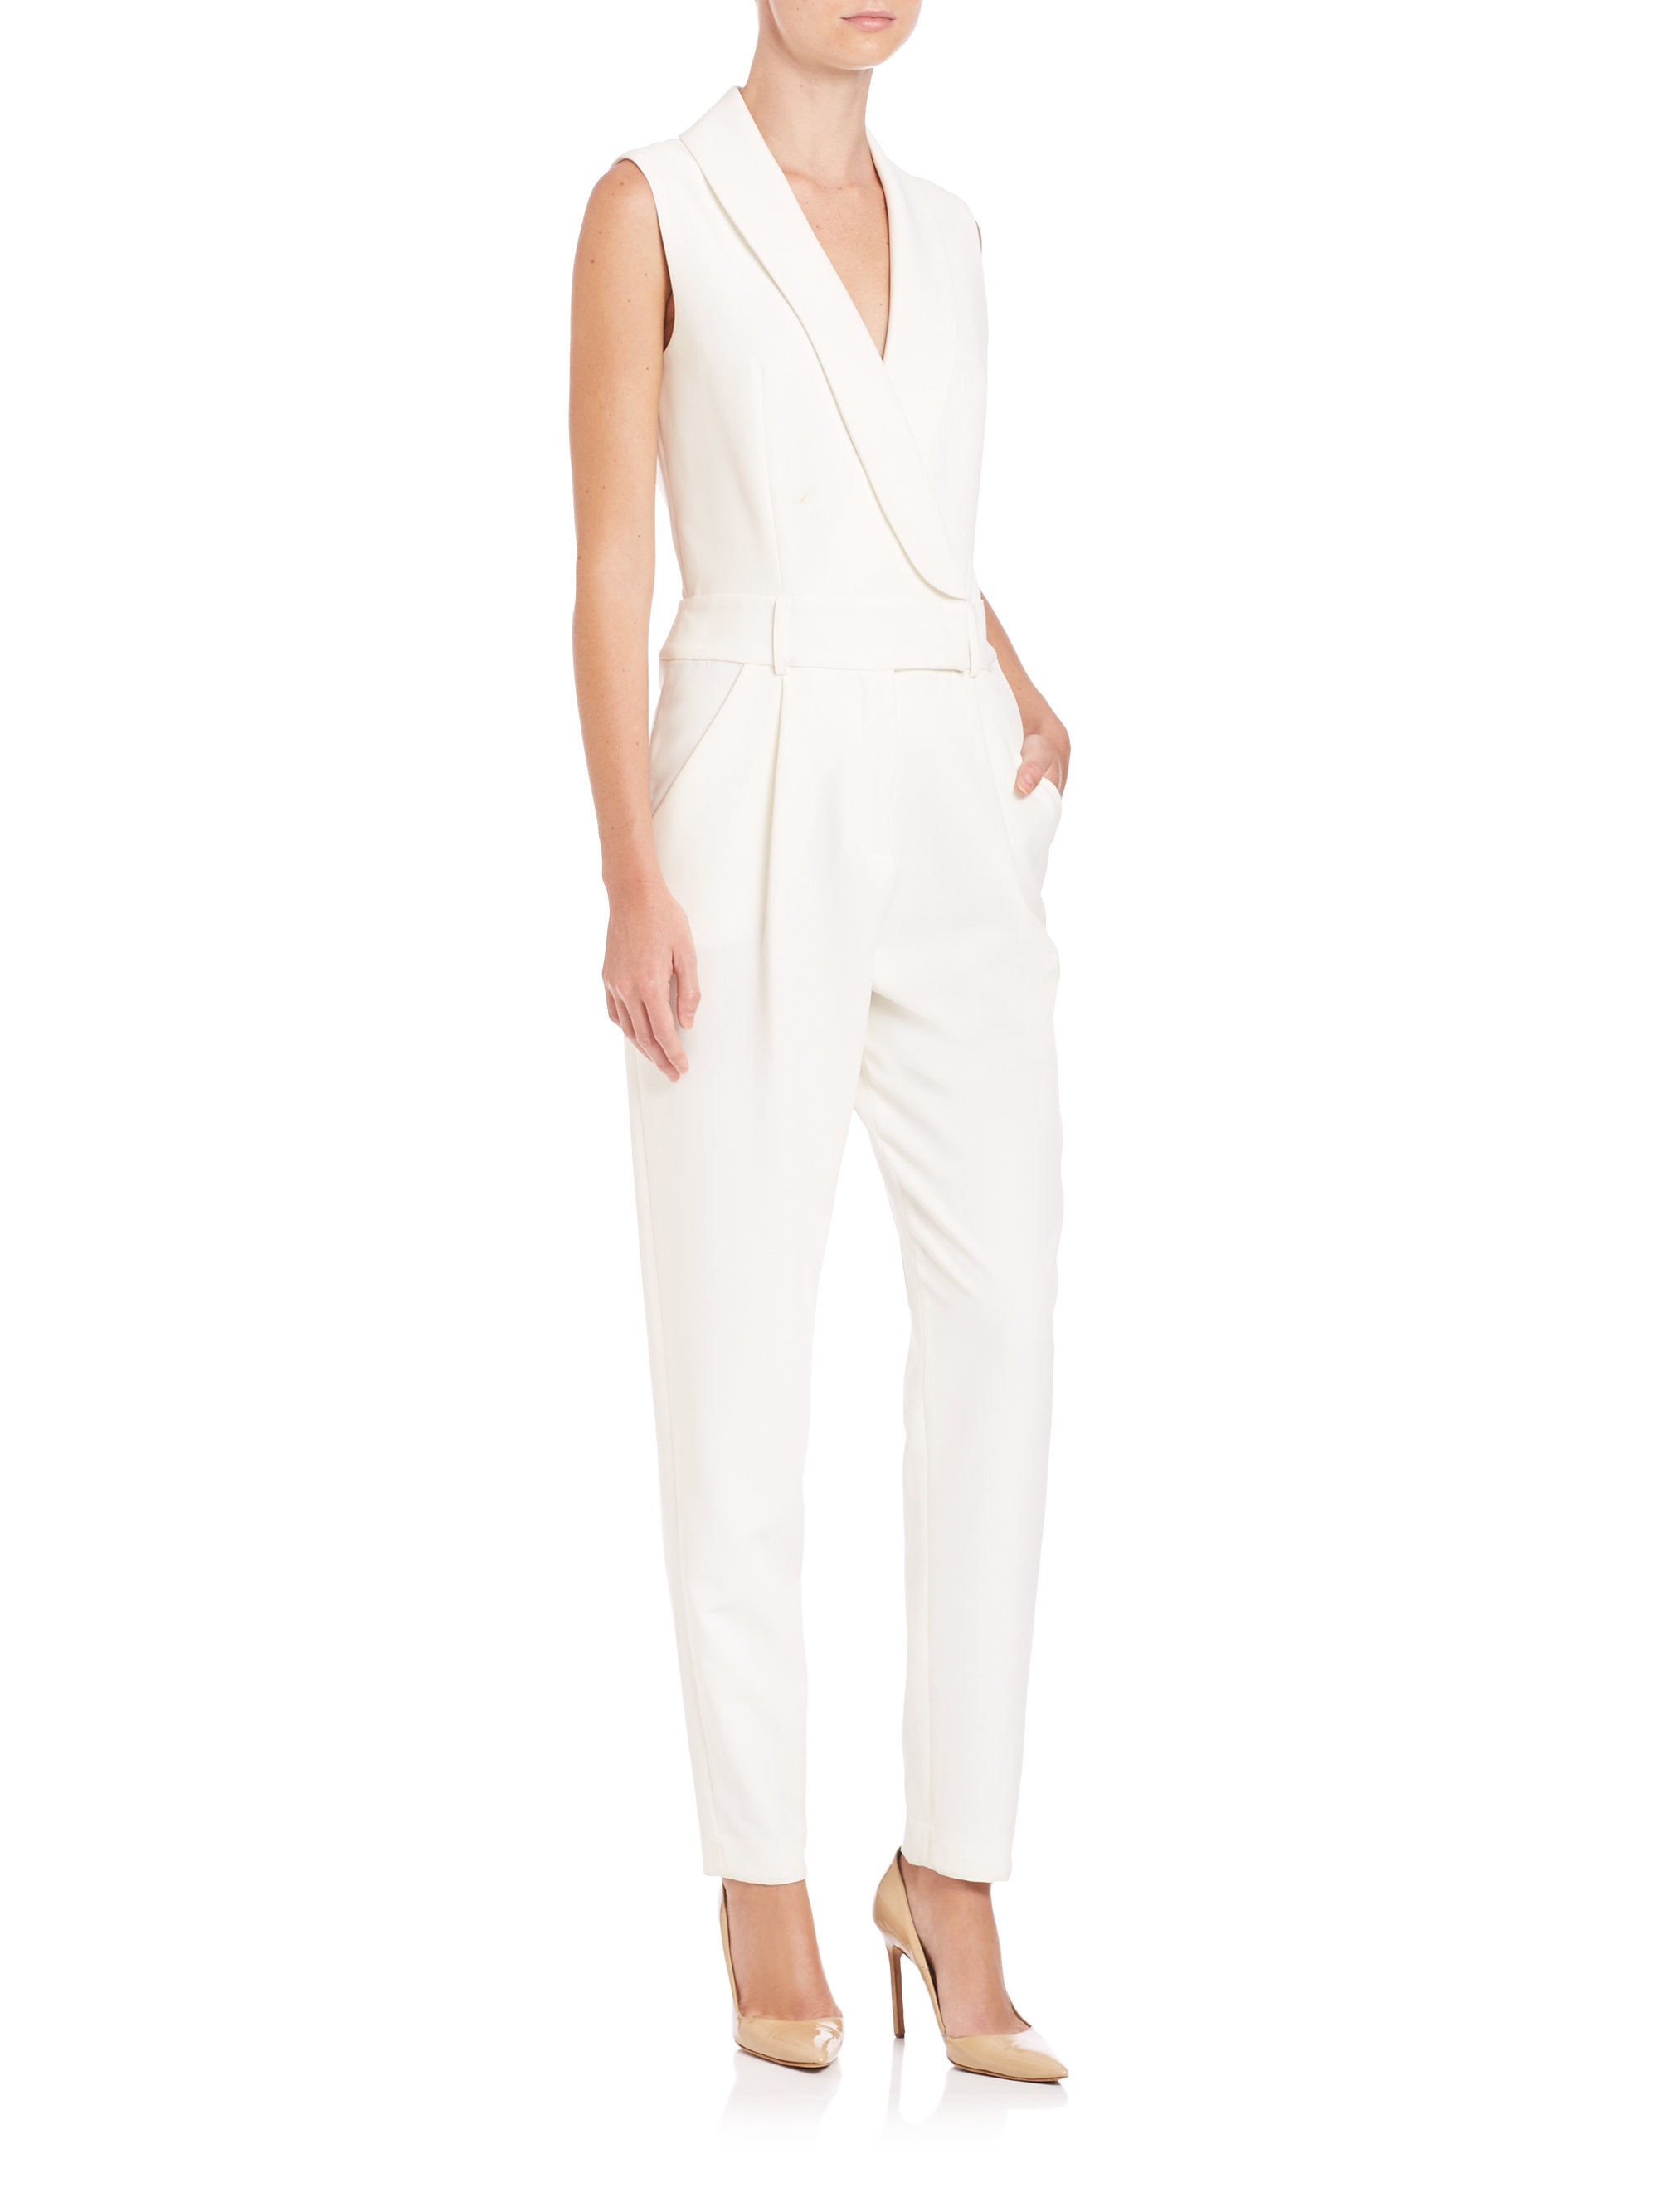 Max Mara White Tailored Jumpsuit Harrods UK | peacecommission.kdsg.gov.ng